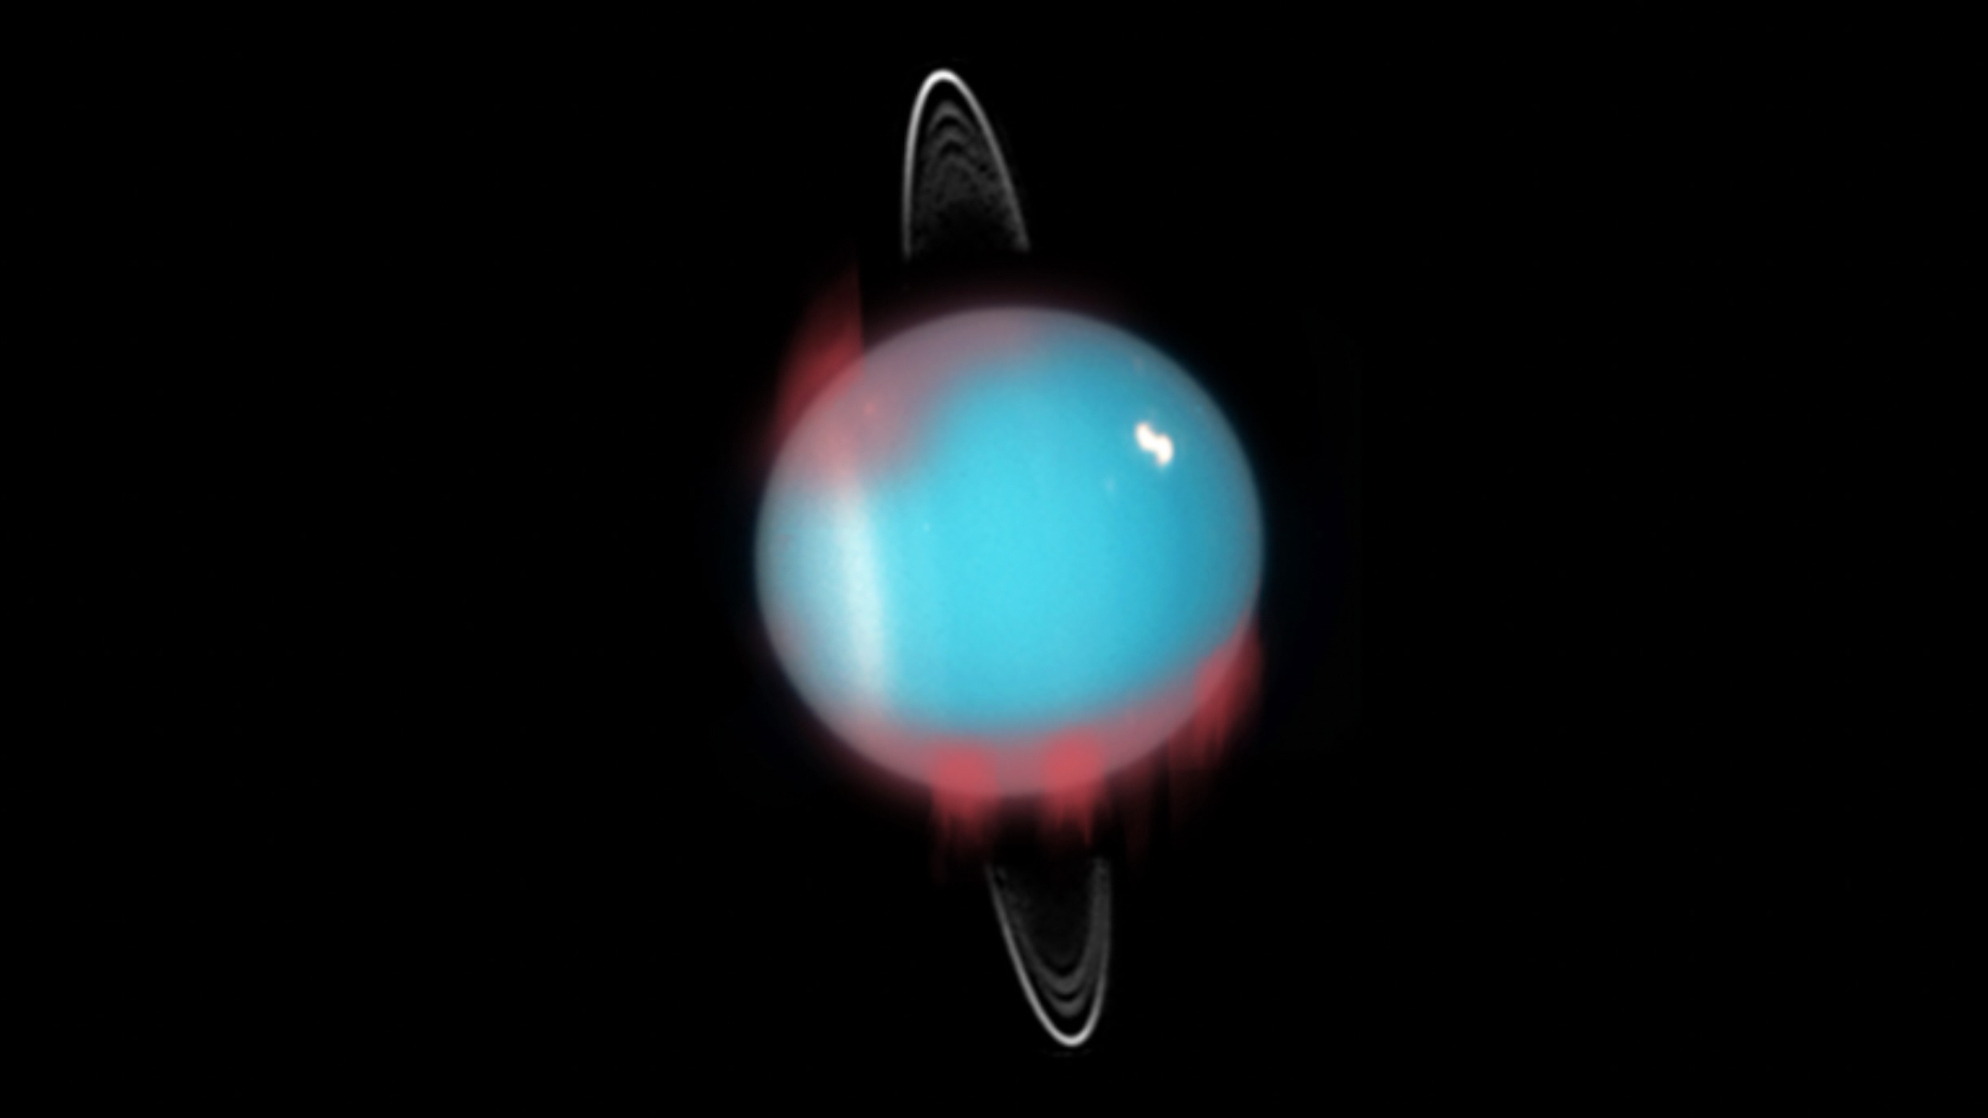 A view of a blue planet with frail rings. There are red, hazy streaks seen to mark where the auroras are.